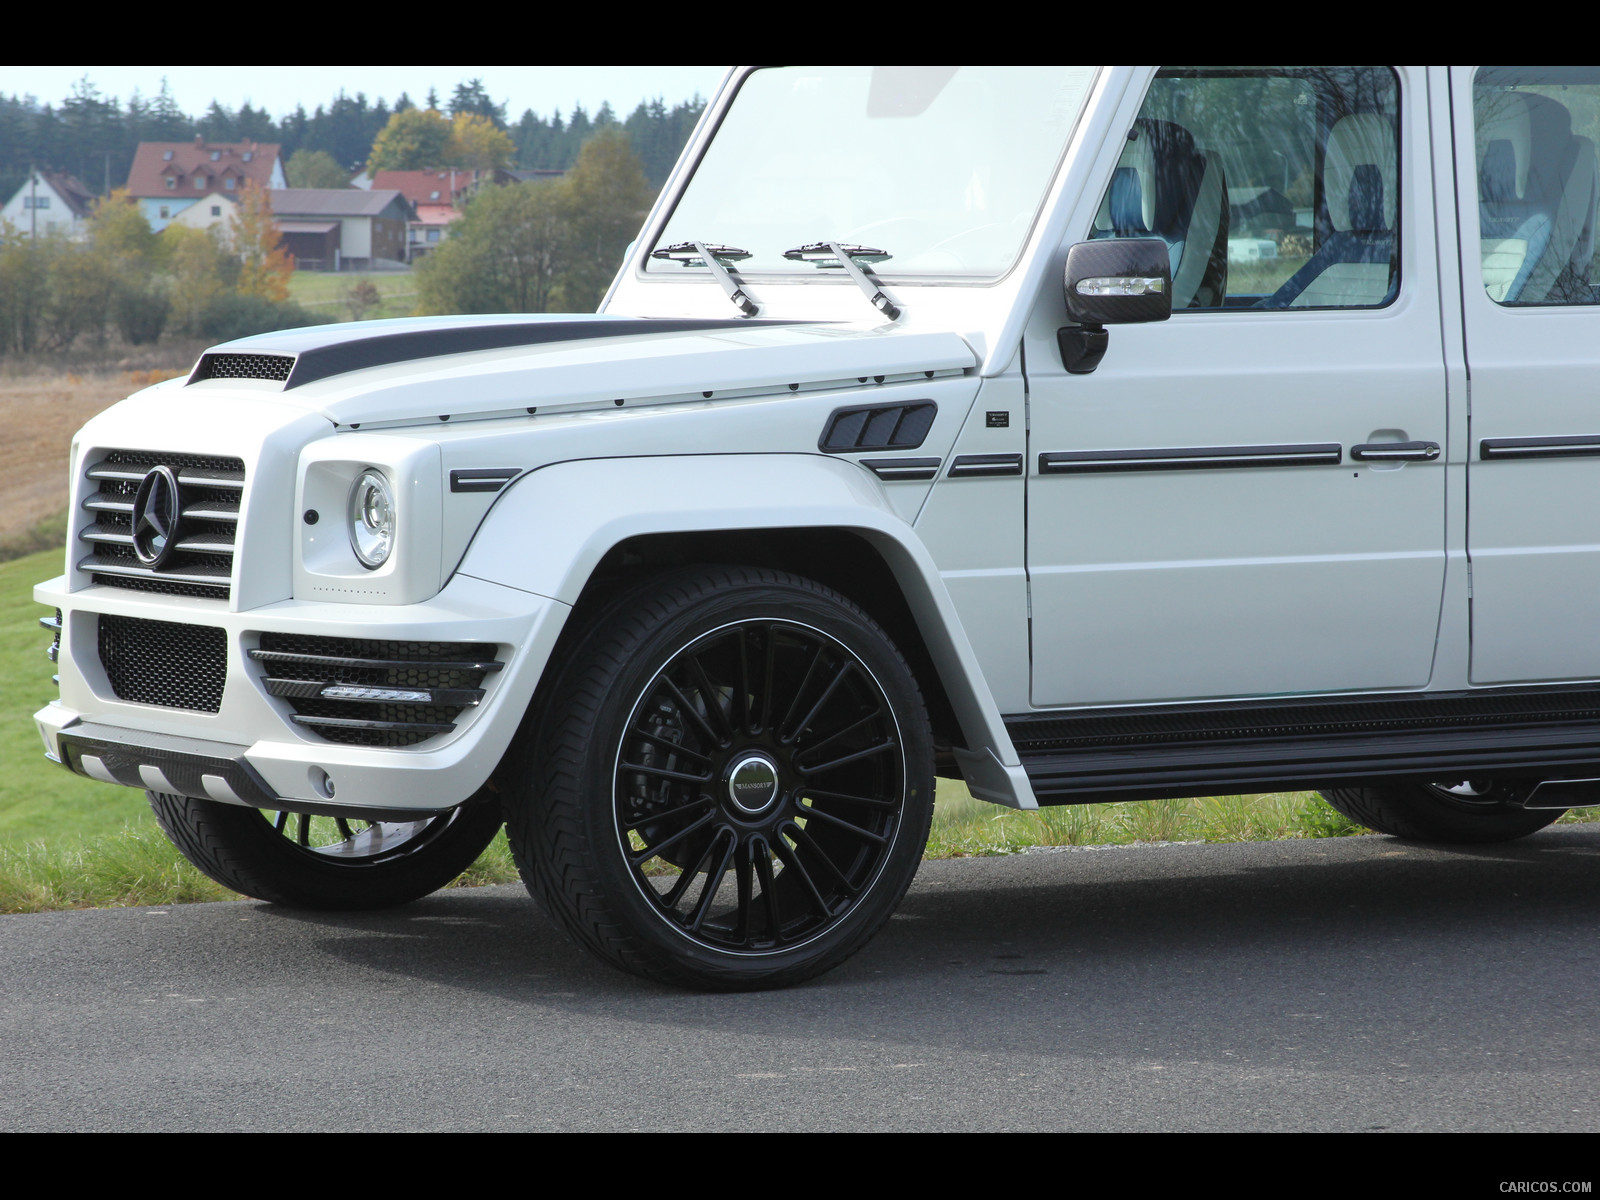 Mansory G-Couture based on Mercedes G-Class White - Front, #29 of 39